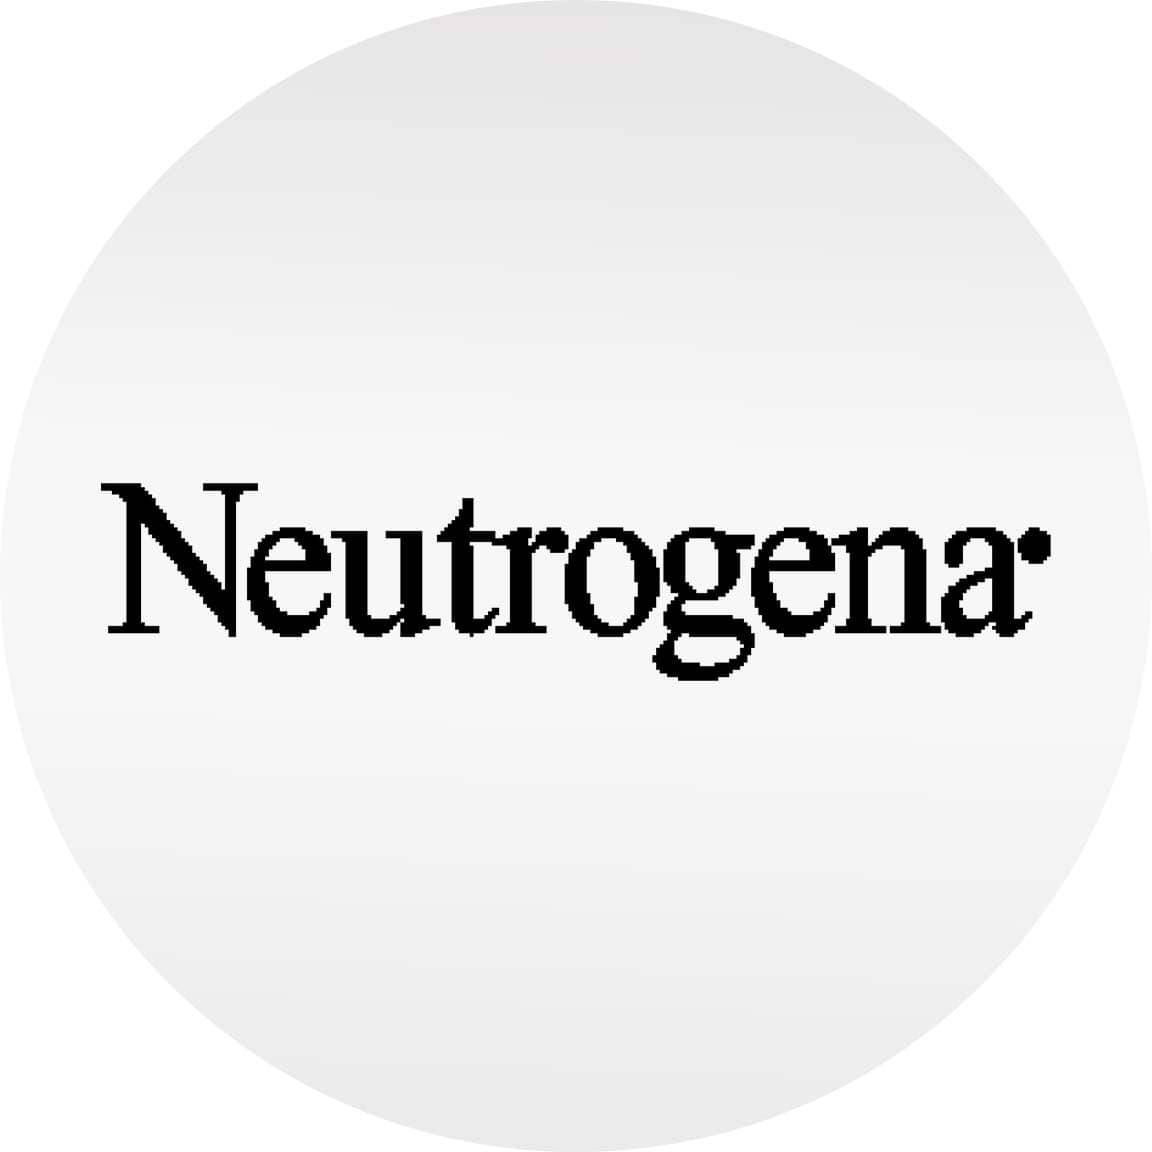 Shop for Neutrogena® brand beauty products